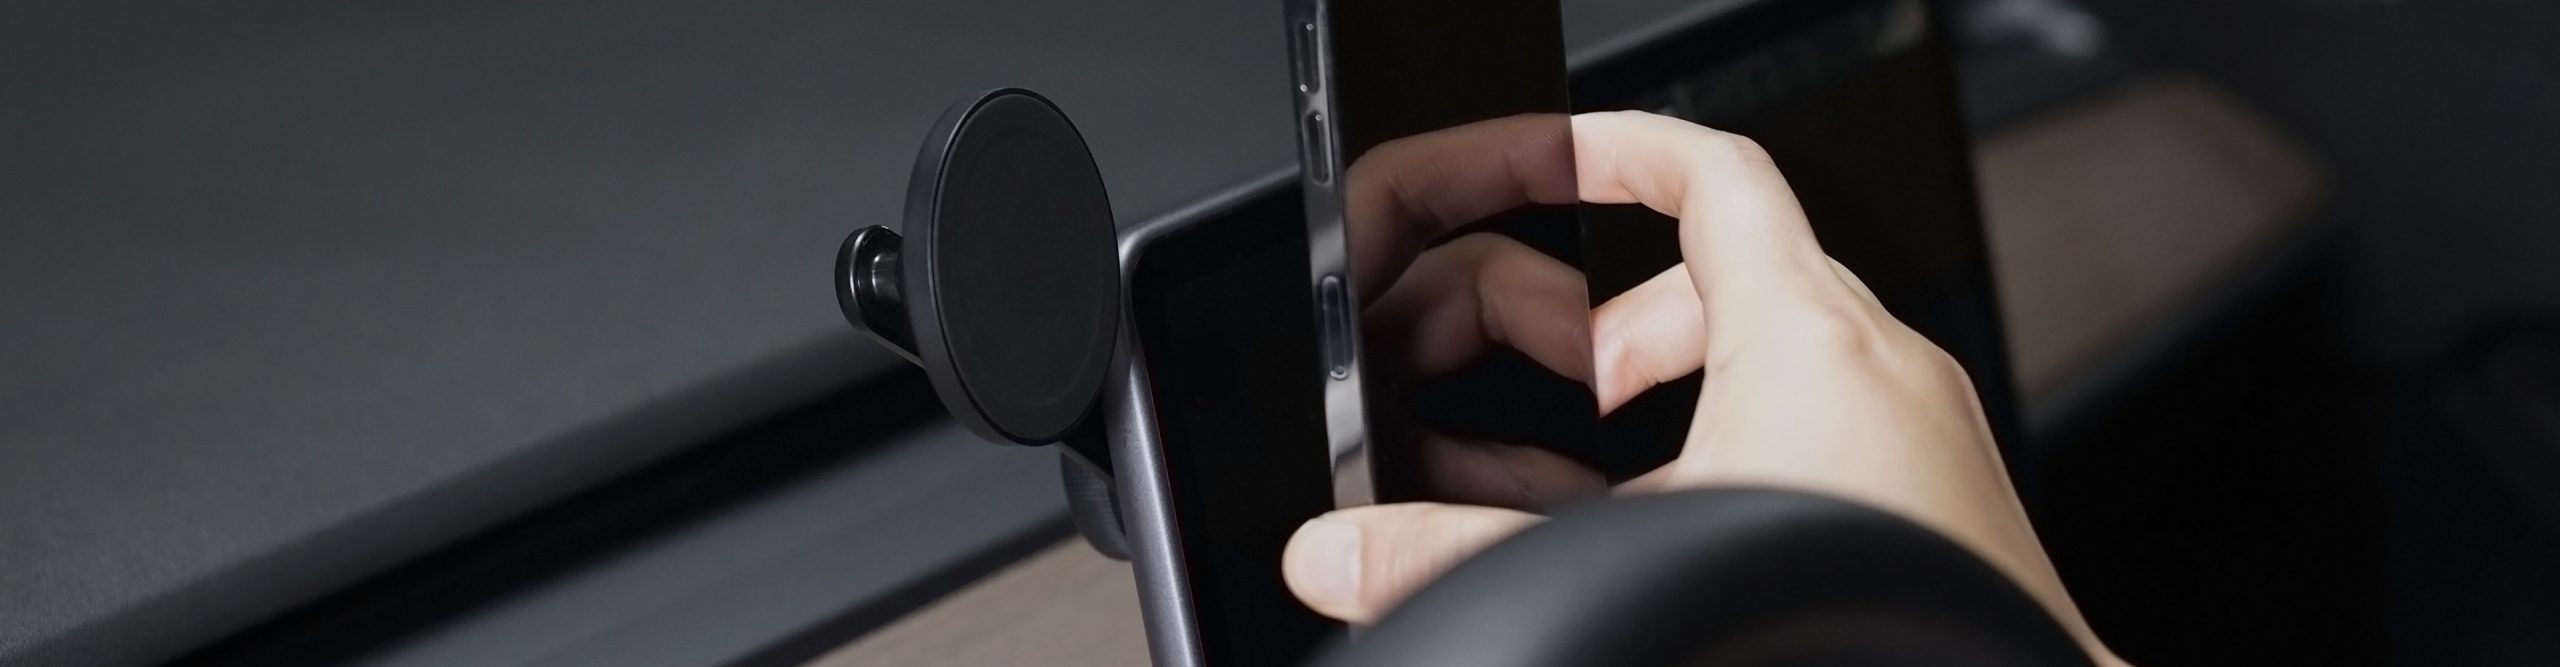 Person Mounting an iPhone on the Terus Monitor Mount